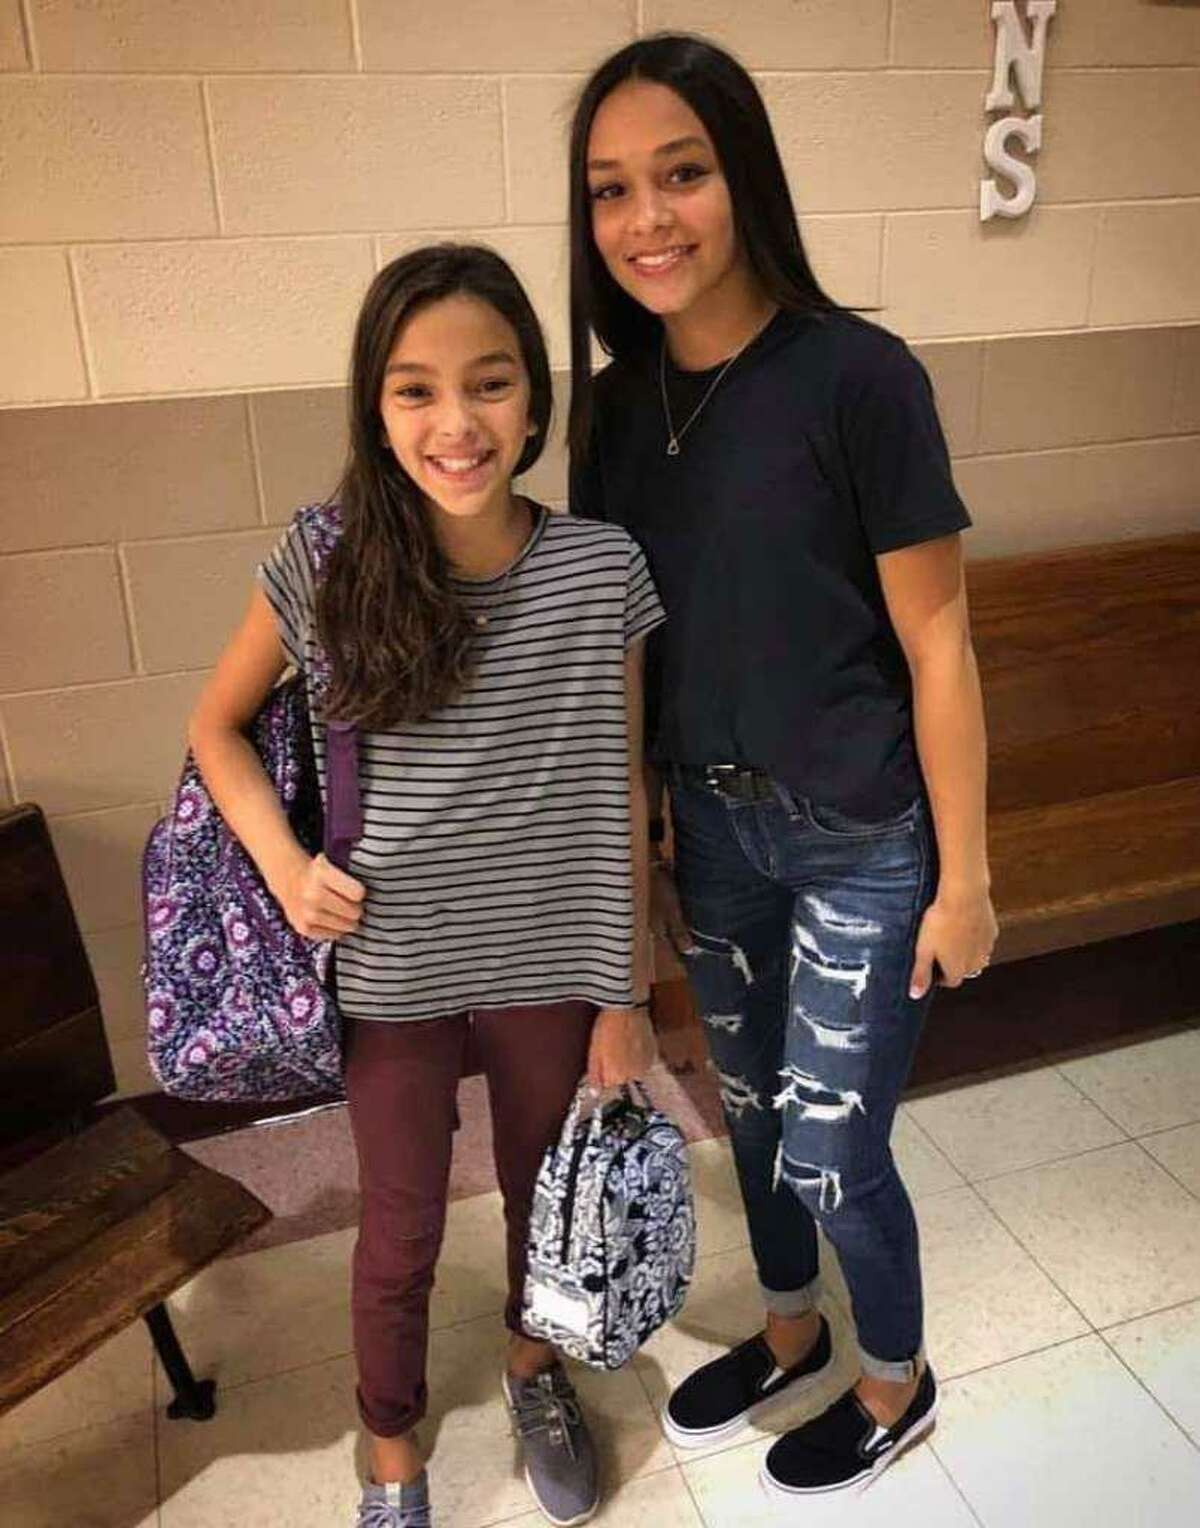 London Sophia Bribiescas, 10, is shown with her sister, Alexa Denice Montez, 16. The sisters were found shot to death with their mother, Nichol Olsen, at a home near Leon Springs in far northwest Bexar County on Jan. 10, 2019.